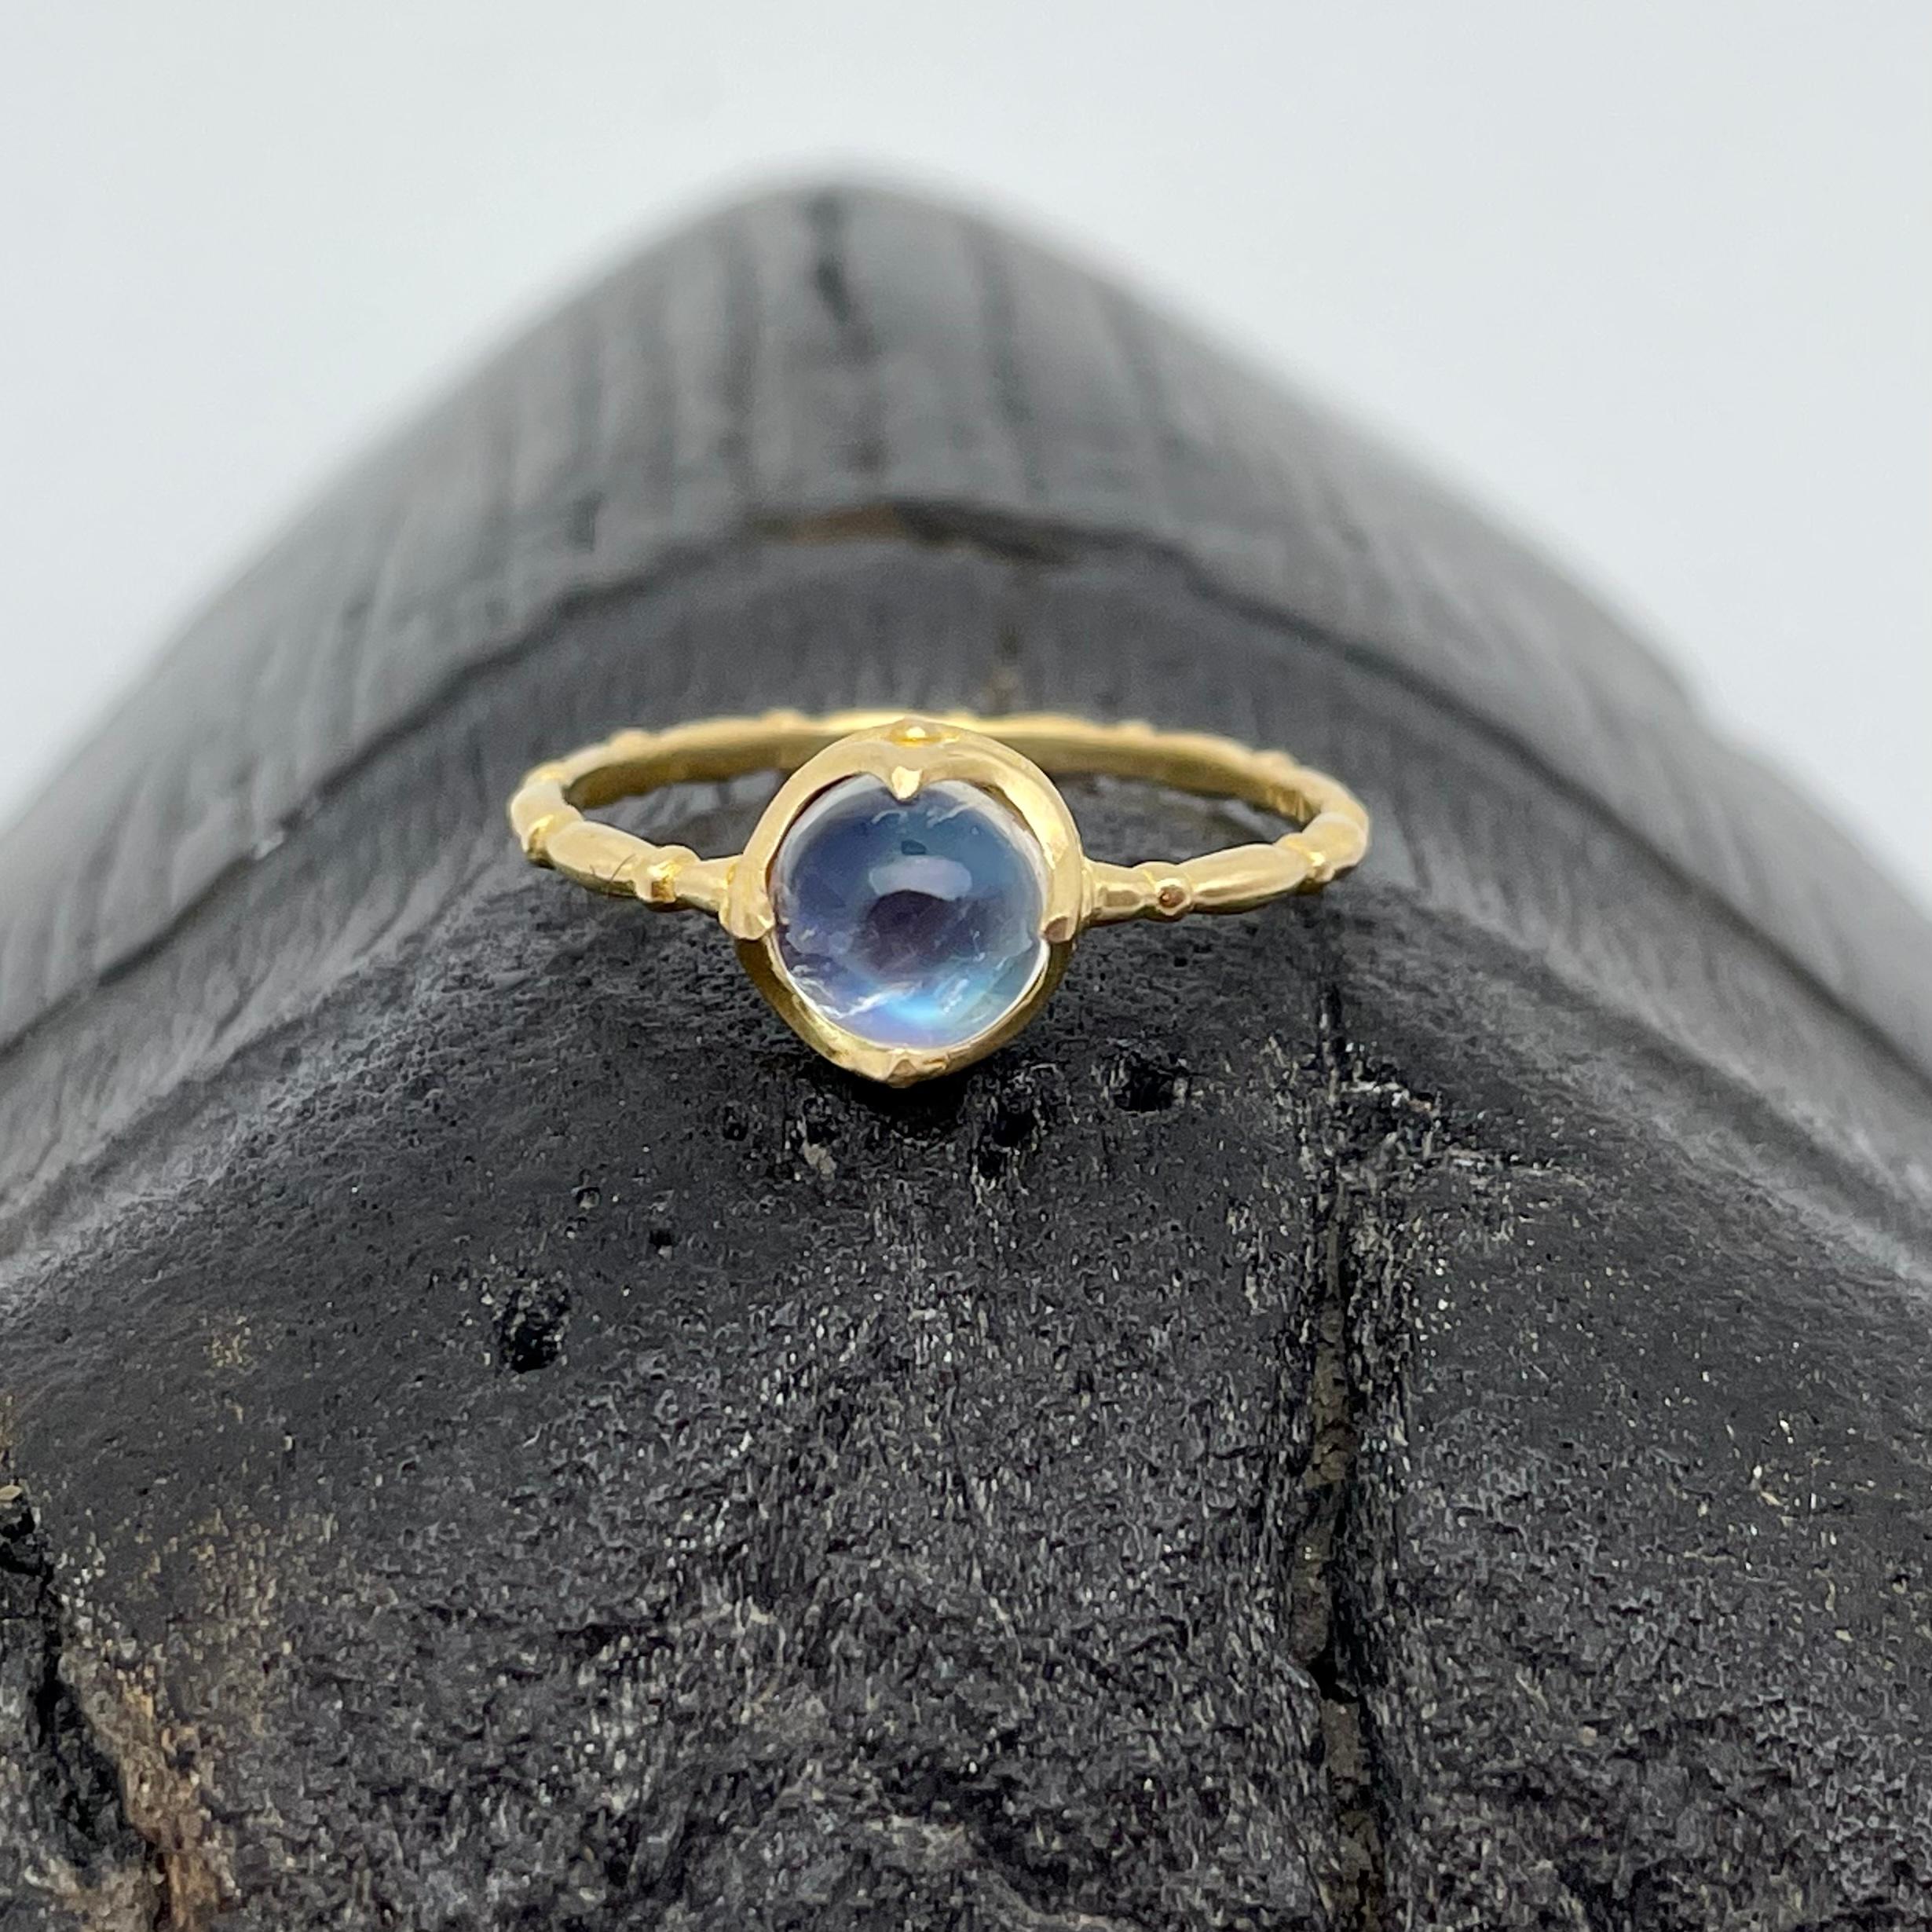 A top grade 6 mm round rainbow moonstone is held in an ancient-inspired 